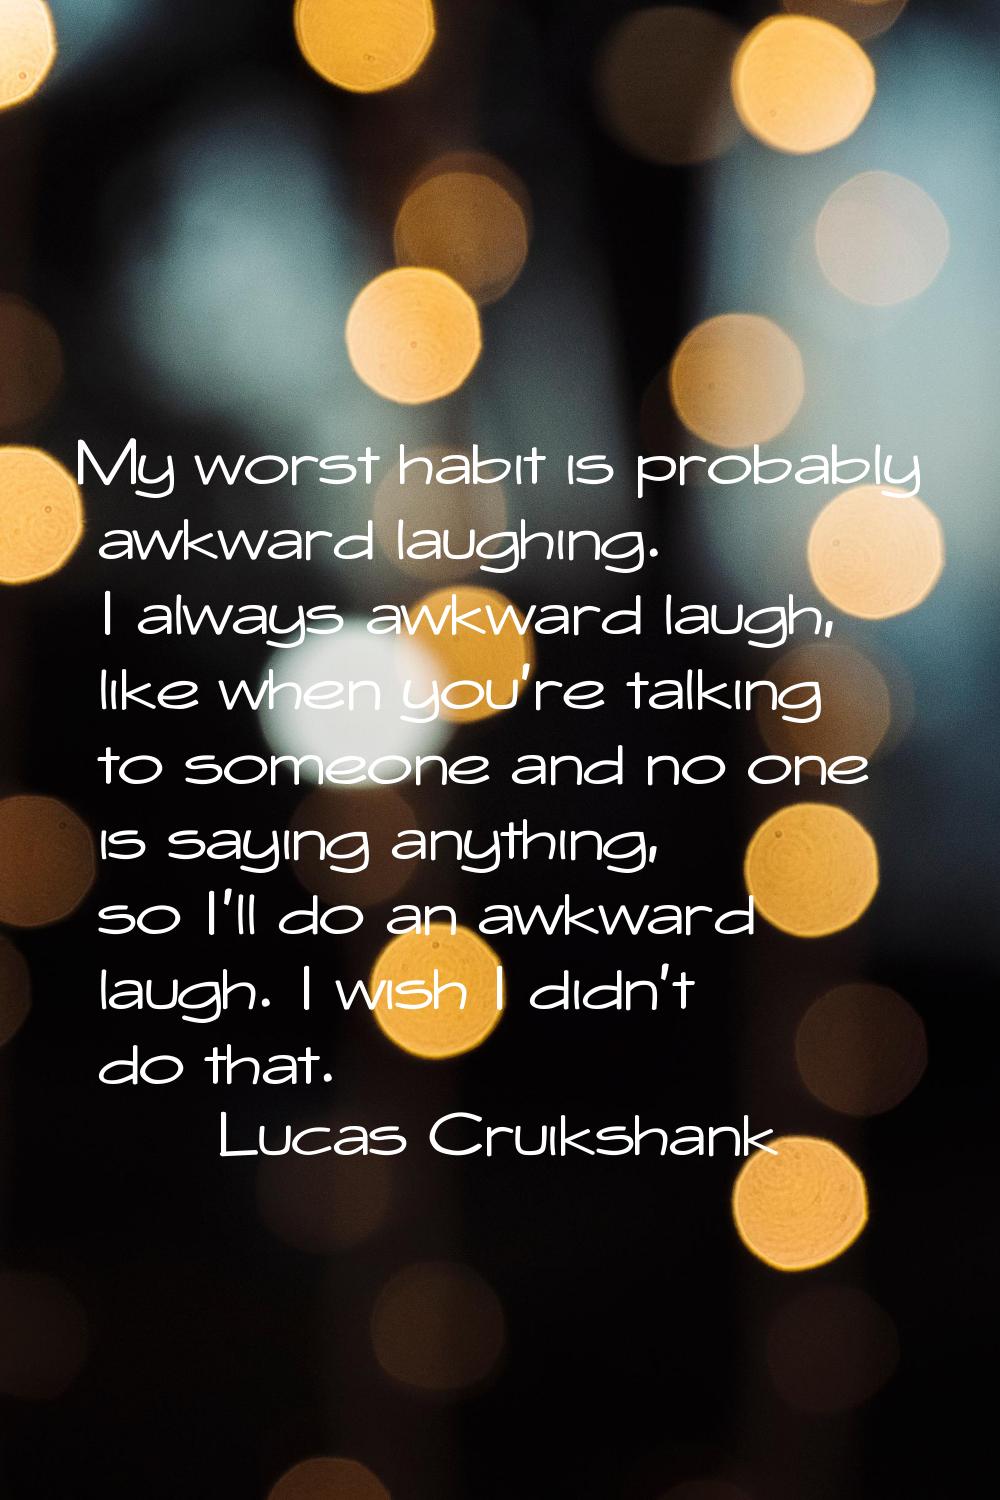 My worst habit is probably awkward laughing. I always awkward laugh, like when you're talking to so